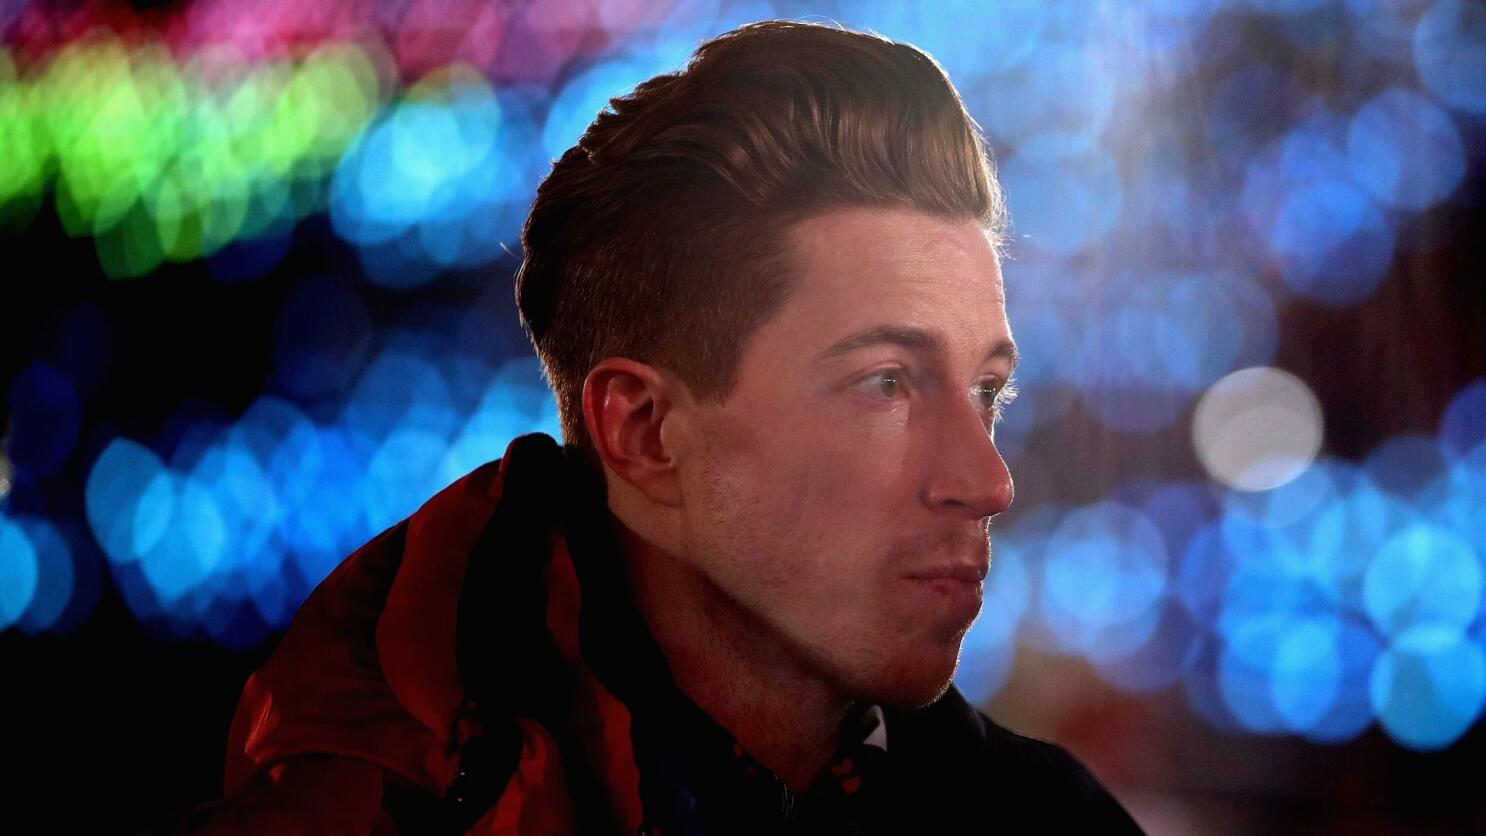 Shaun White on competing again after horrific crash: 'I was a bit terrified